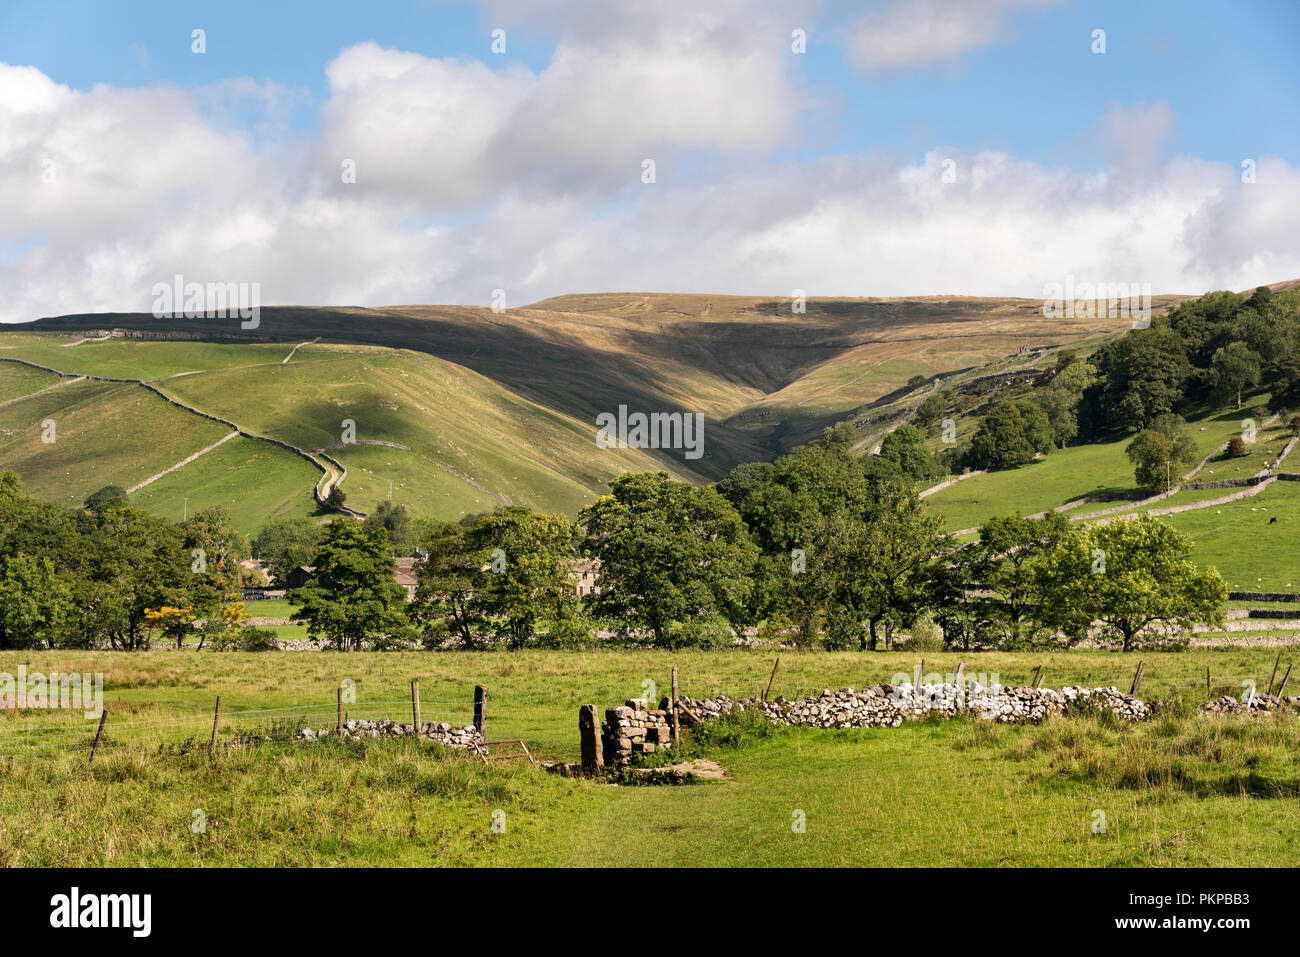 'The Dales Way' long distance footpath near Starbotton, Wharfedale, in the Yorkshire Dales National Park, UK. Buckden Park is on the horizon. Stock Photo